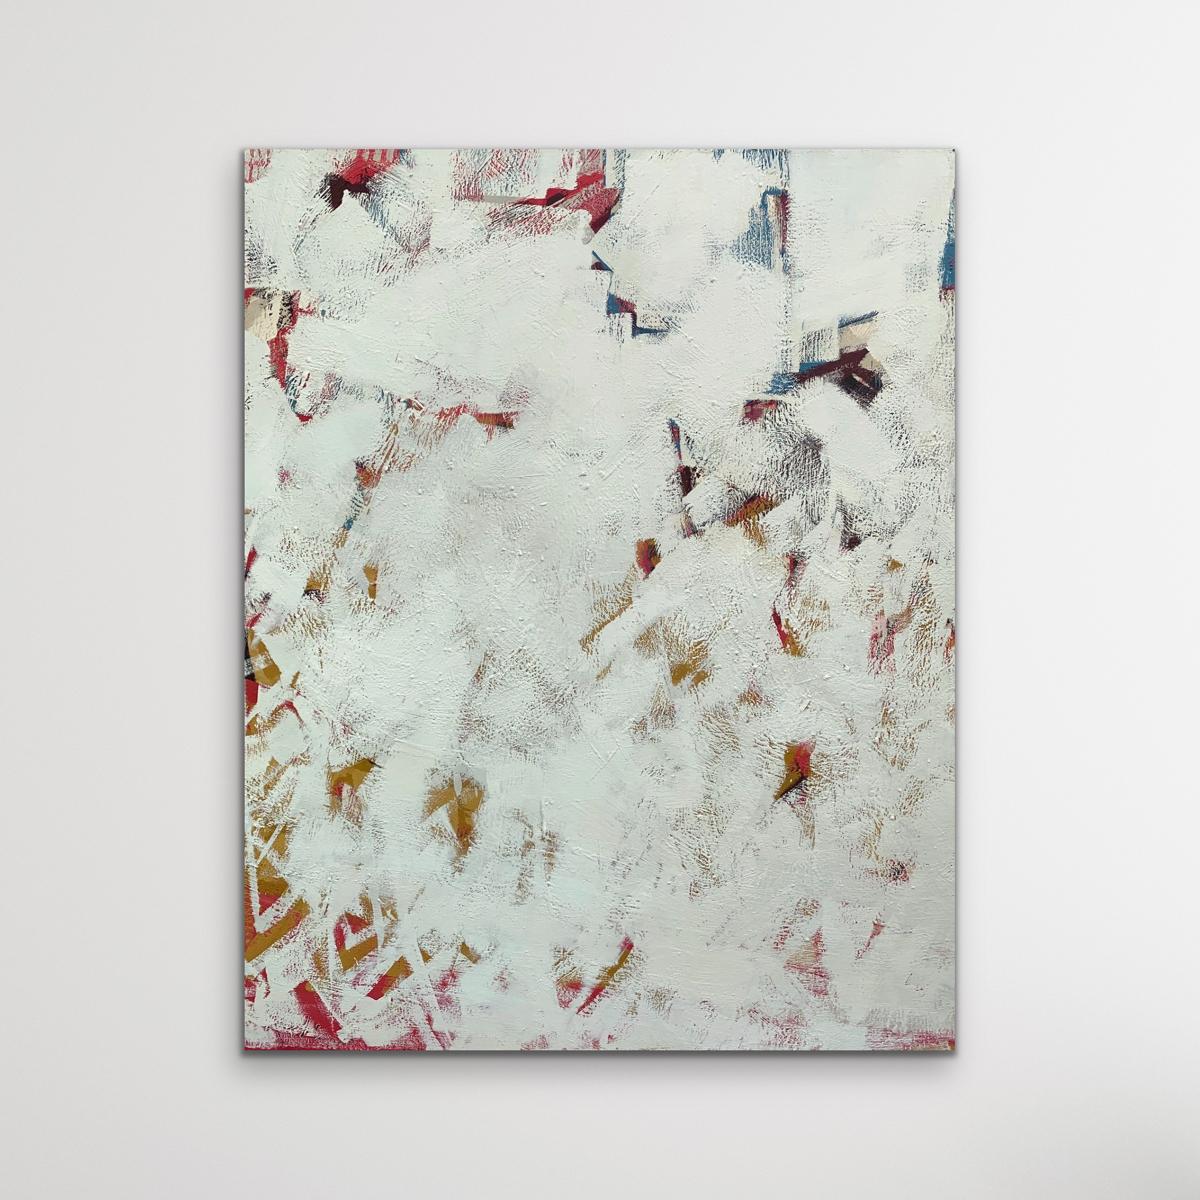 Original abstract oil painting on canvas, textural layers with hidden history, white space, journey in marks. Inspired by balance.

Kelly Washbourne, contemporary painter, available online and in our gallery at Wychwood Art. Kelly Washbourne’s work